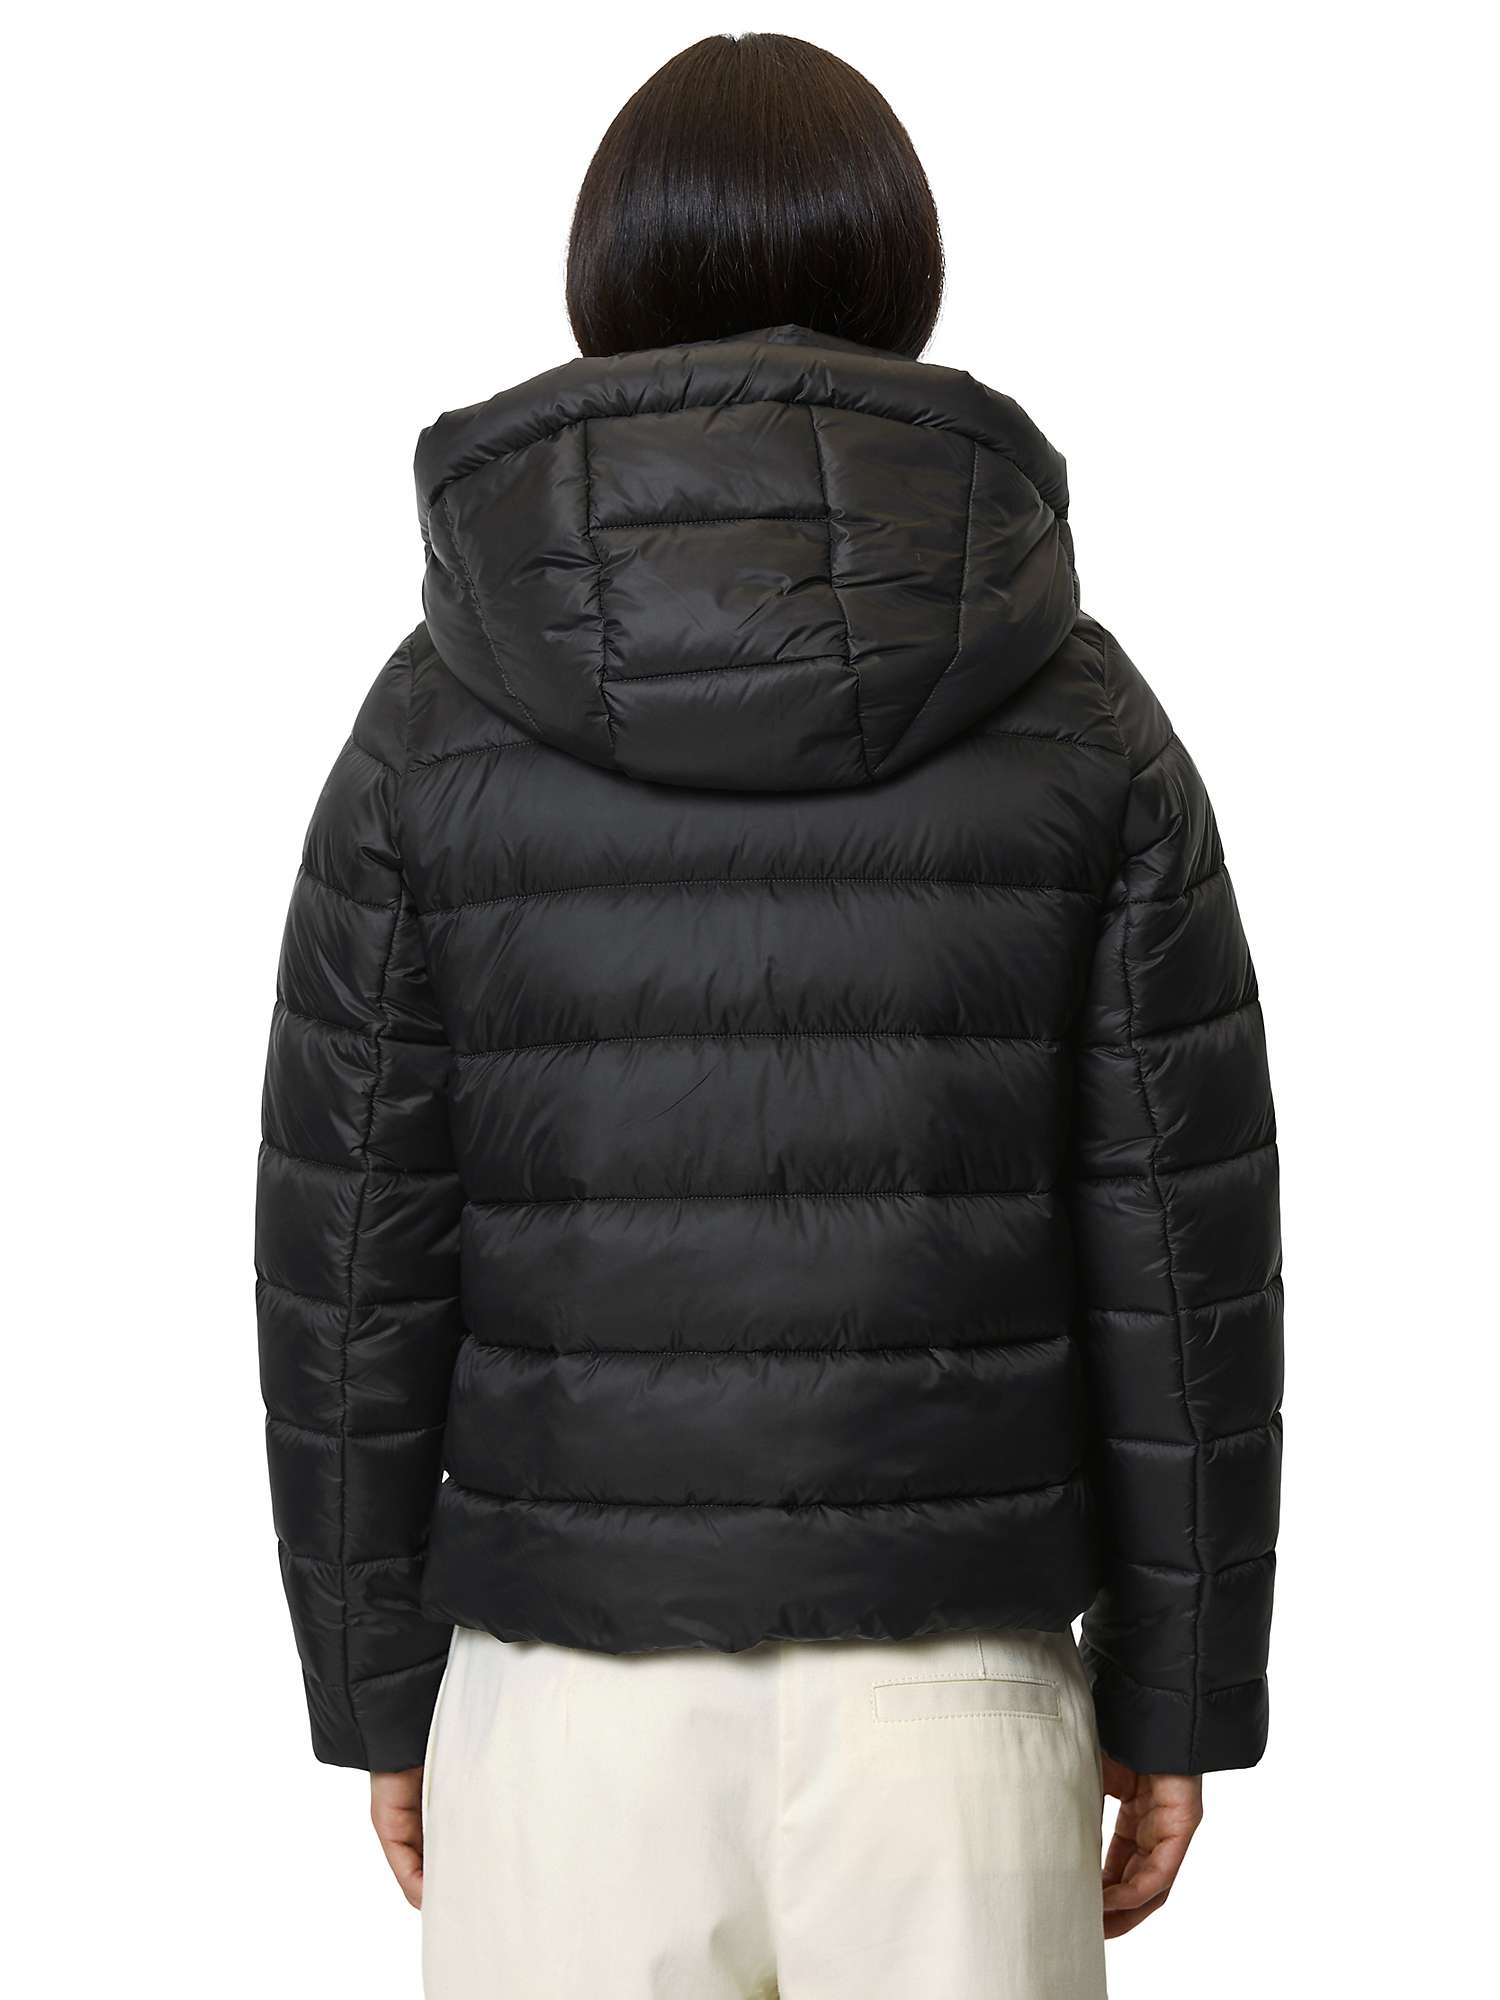 Marc O'Polo Lightweight Hooded Jacket, Black at John Lewis & Partners